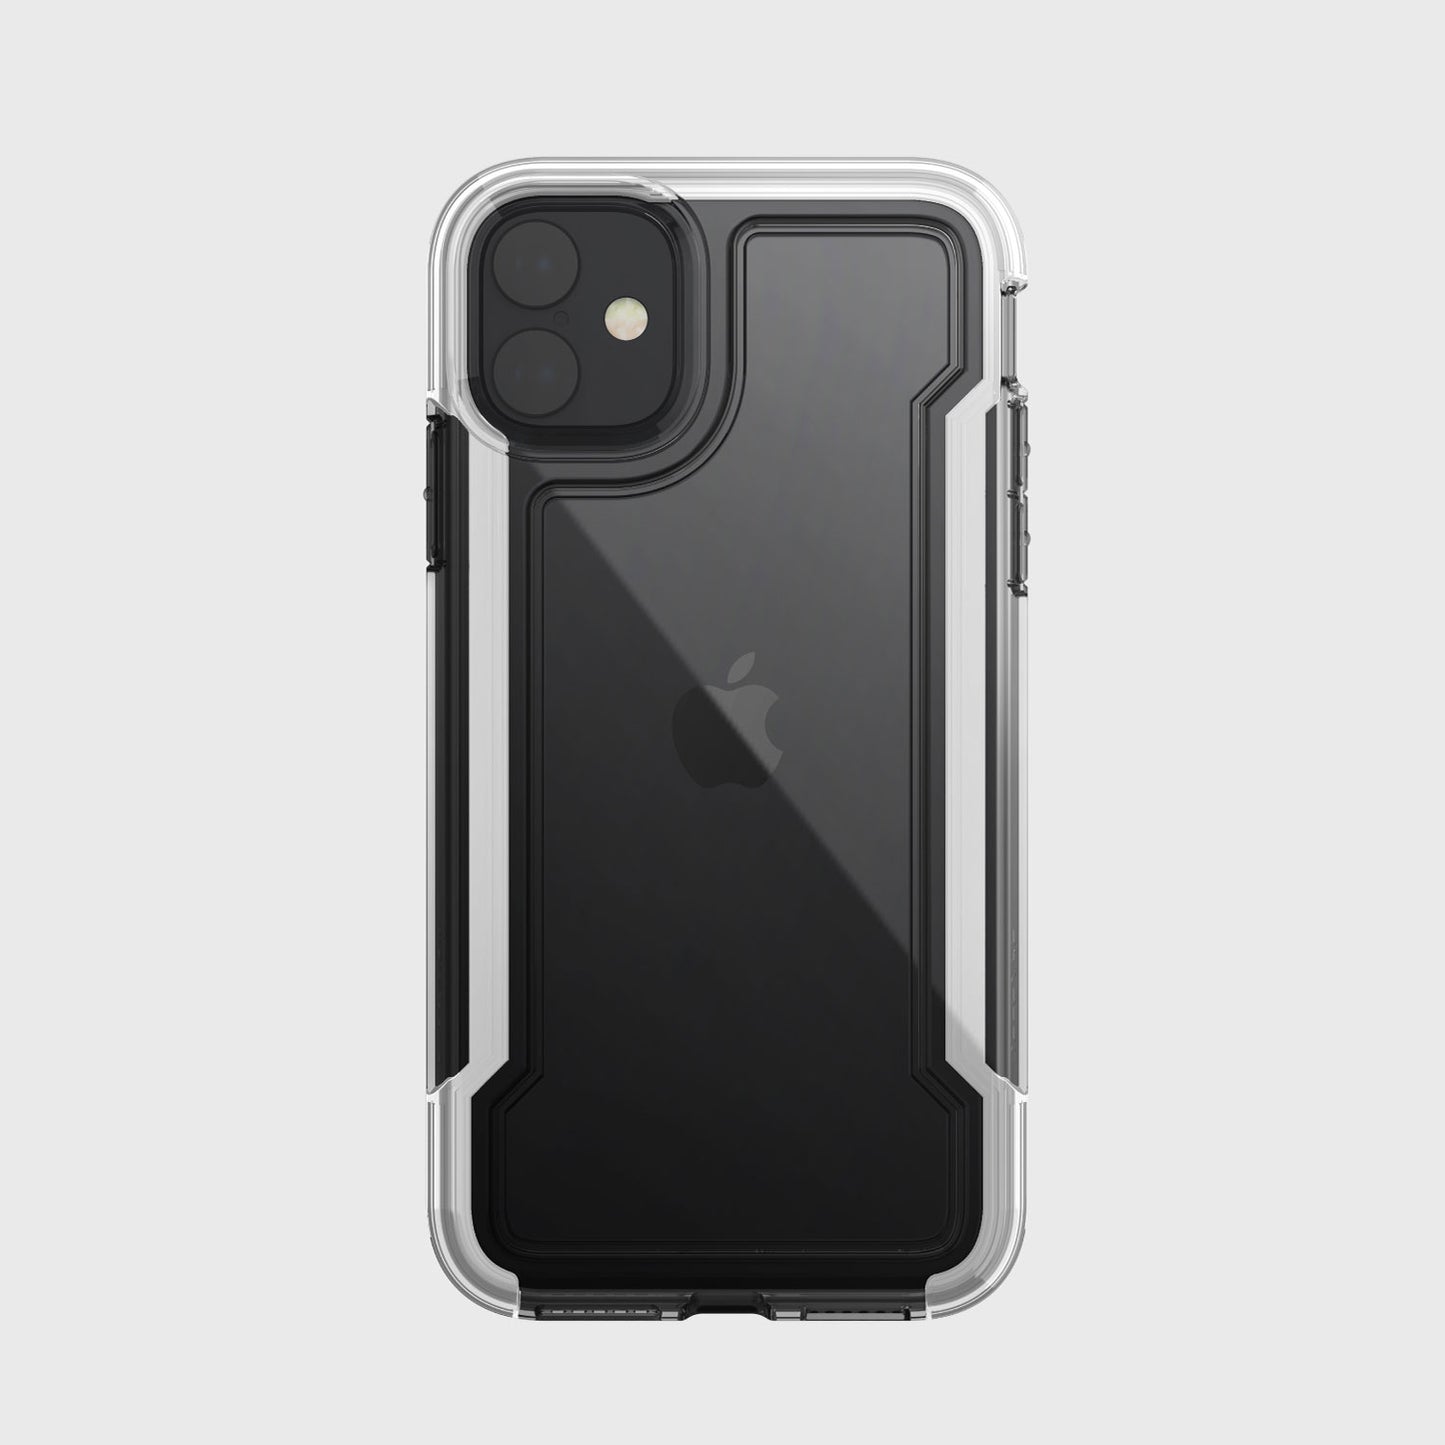 The back view of a Raptic Clear iPhone 11 Case - CLEAR offering shock-absorbing rubber and 2-metre drop protection.